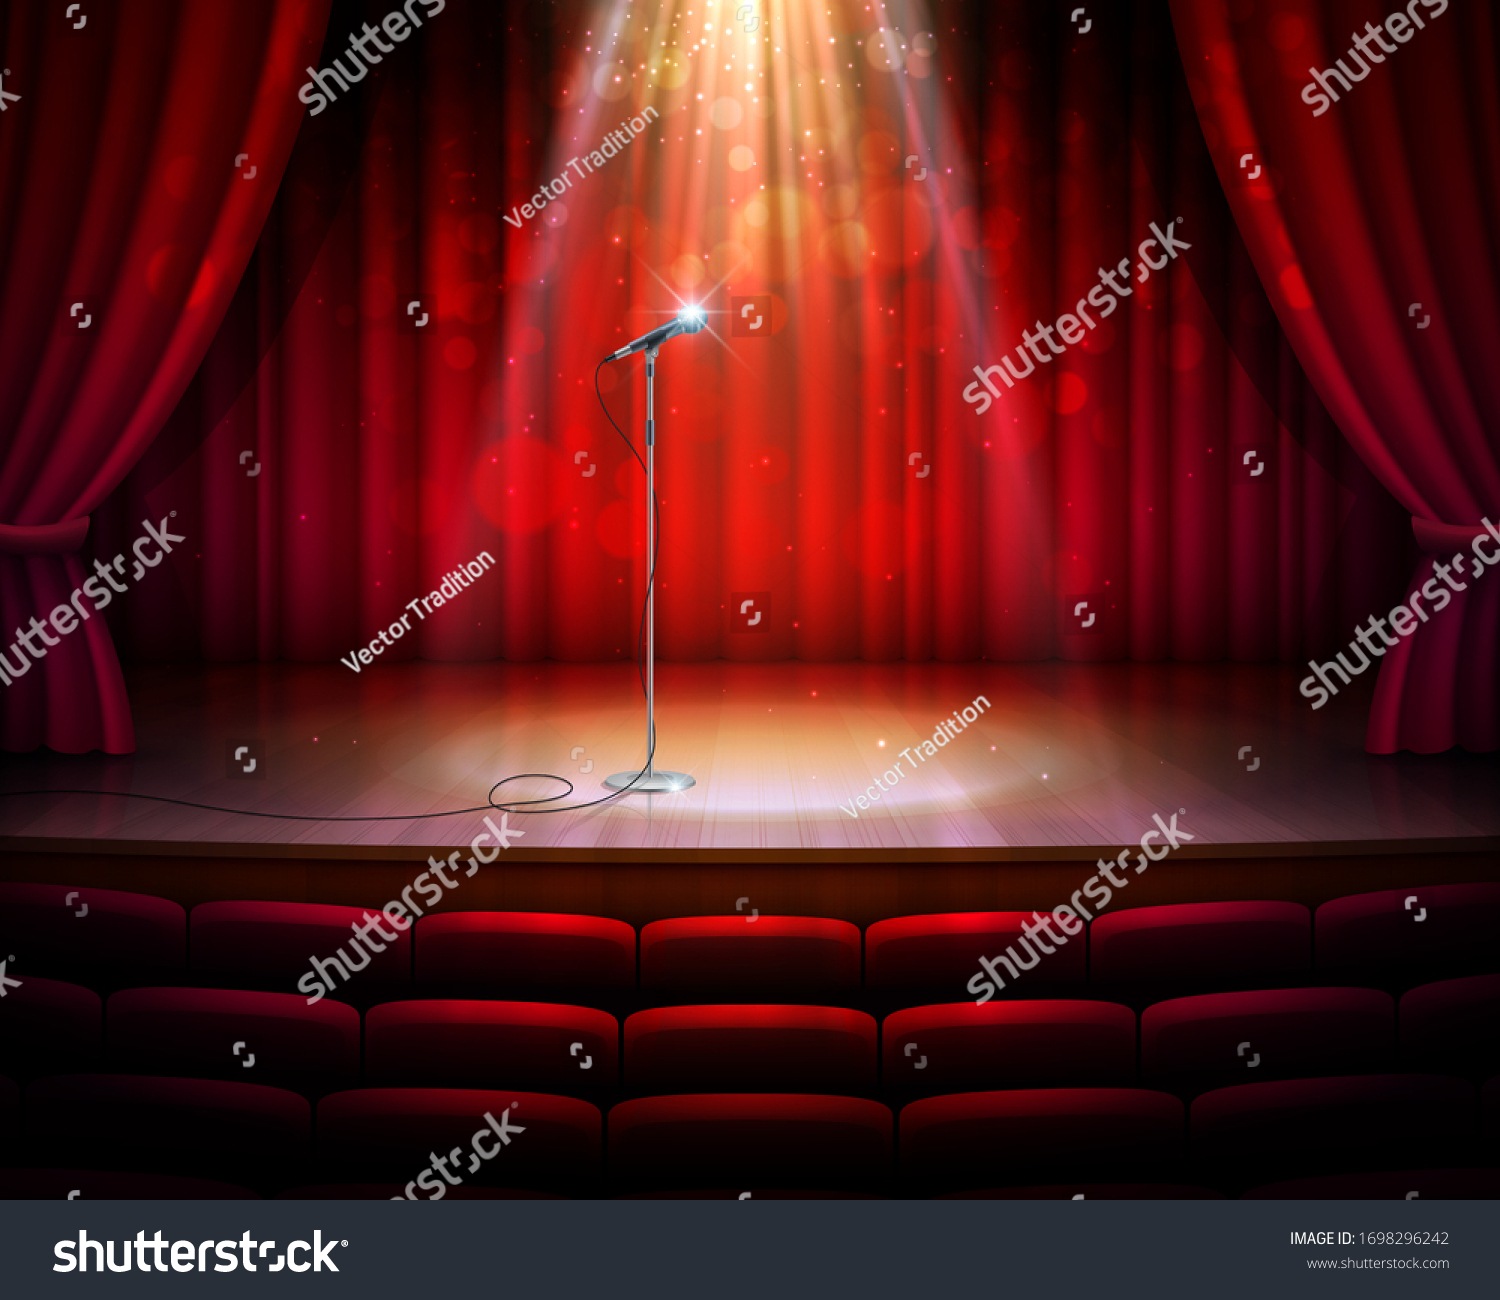 SVG of Stage with red curtains, microphone and spotlight, vector realistic background. Theater, cabaret show or opera music concert scene stage with seats, red drapery curtains and golden light from above svg